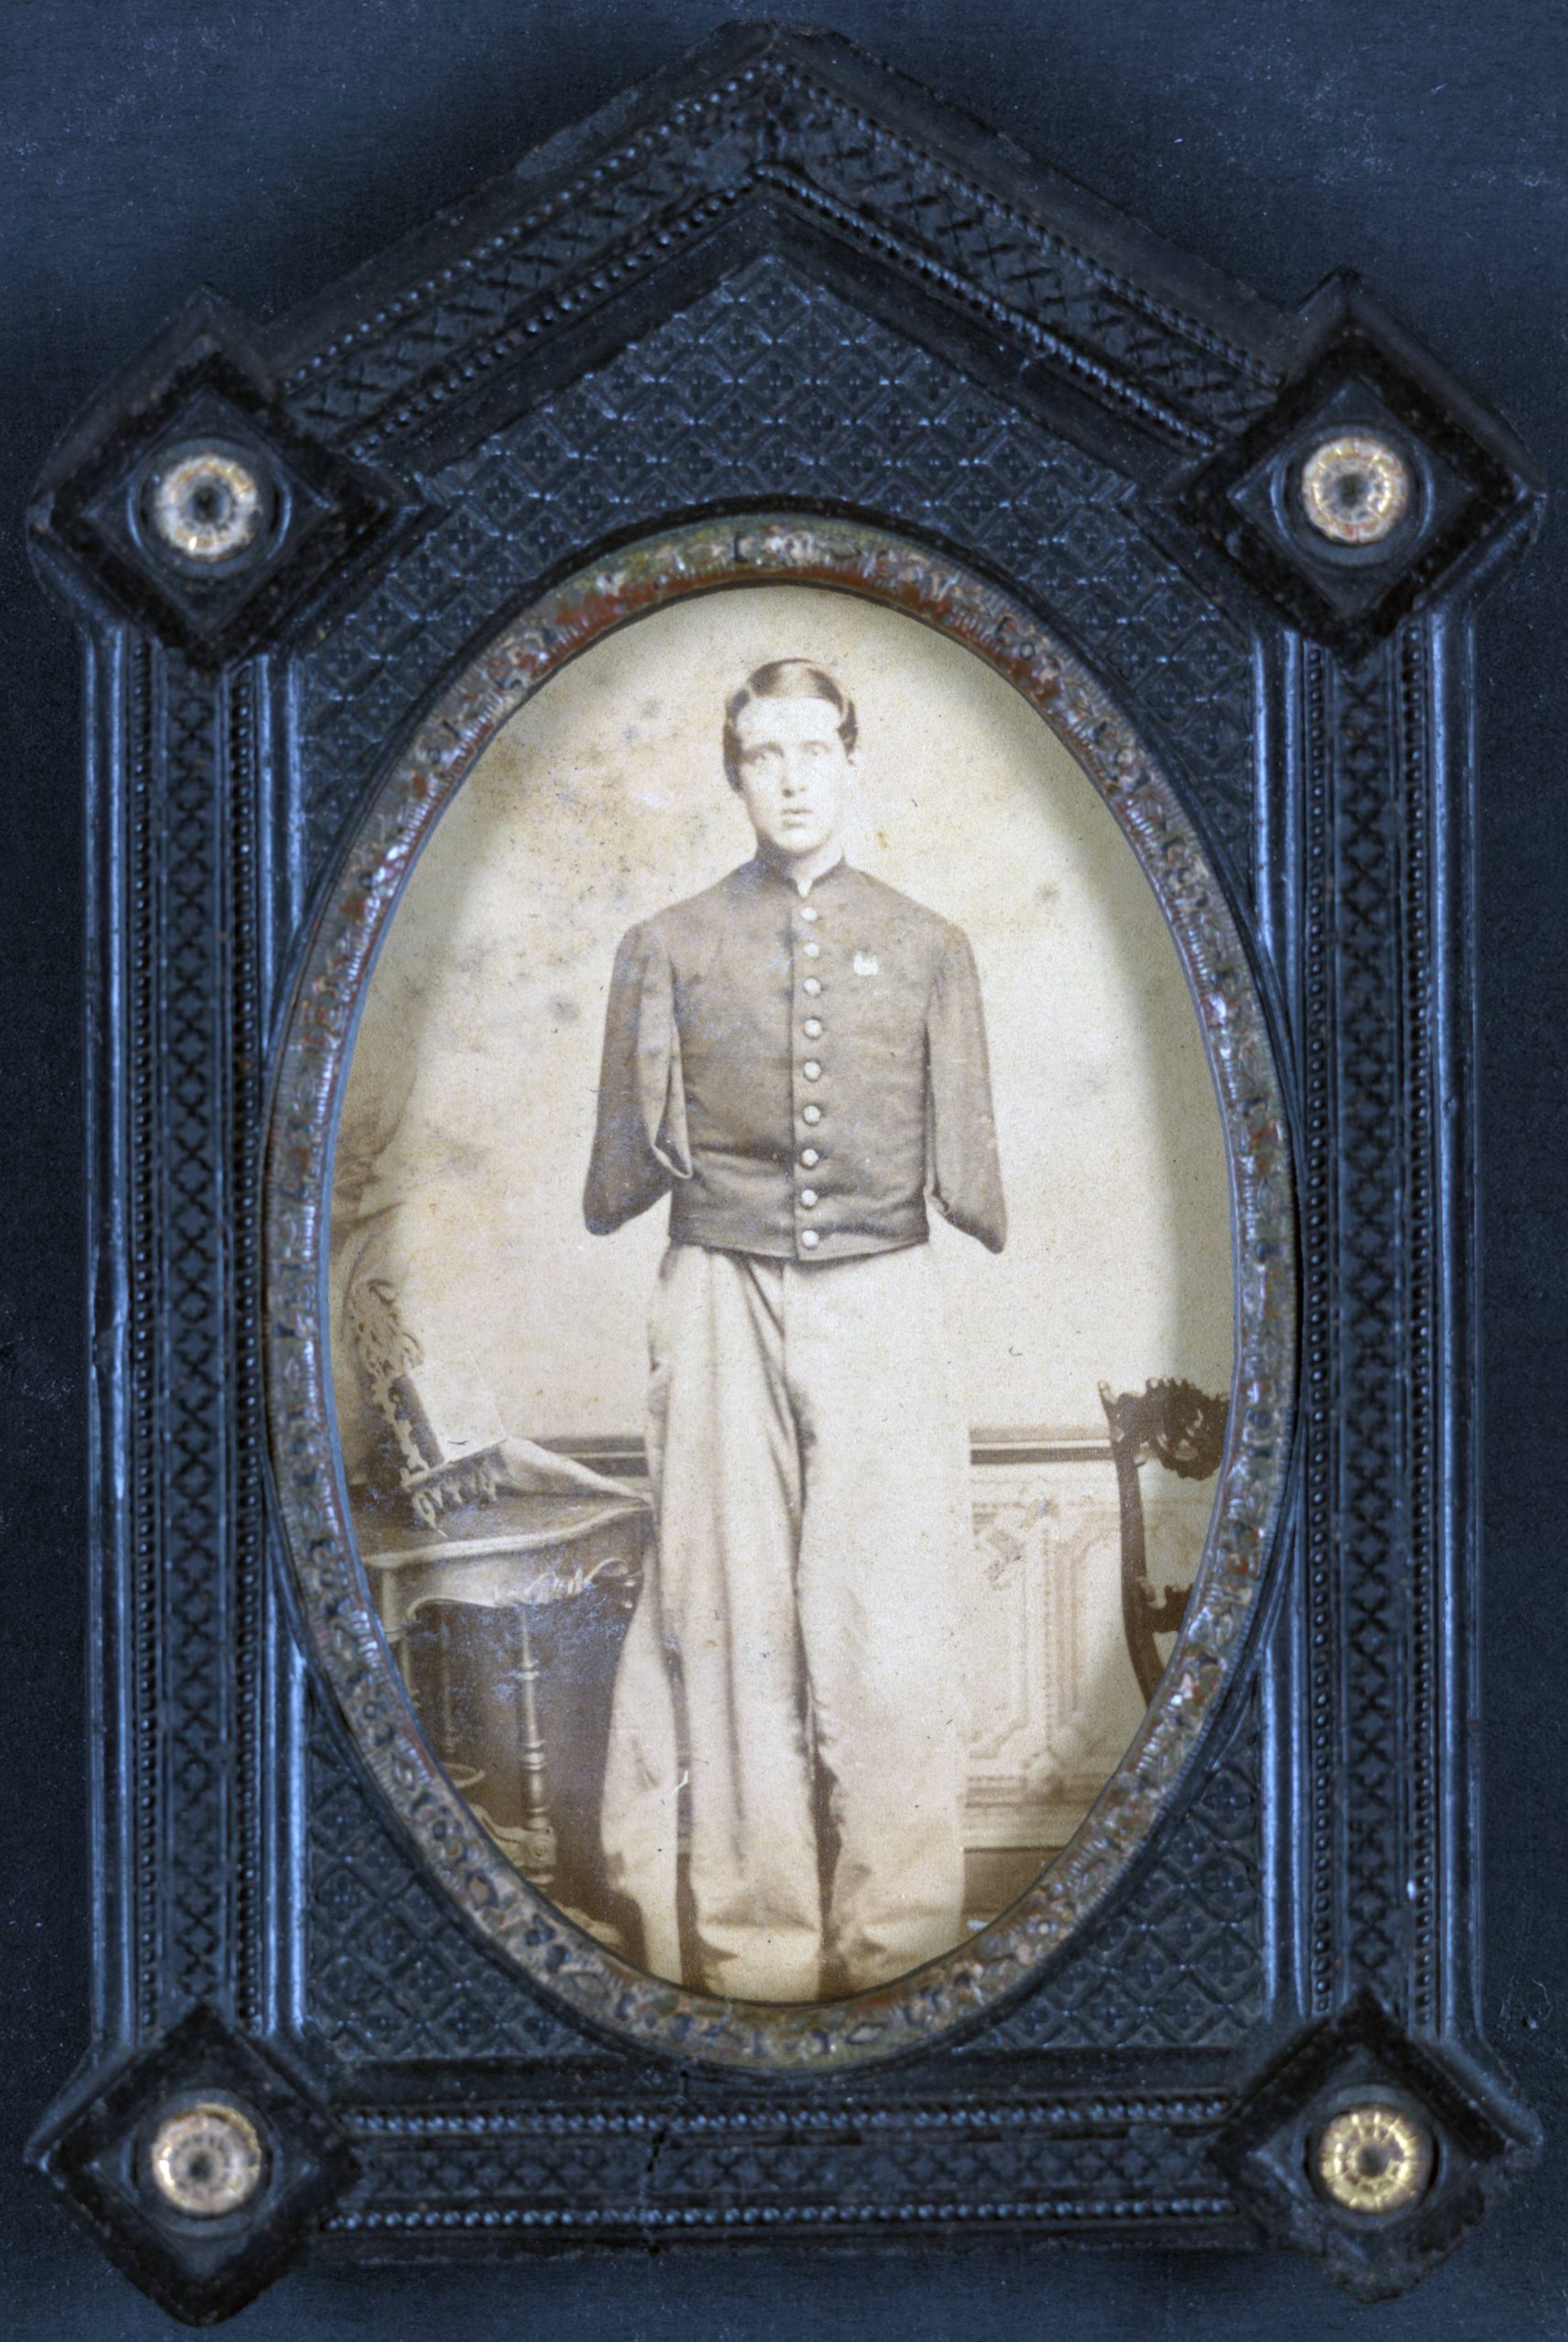 Sergeant Alfred A. Stratton of Co. G, 147th New York Infantry Regiment, with amputated arms. 1864.